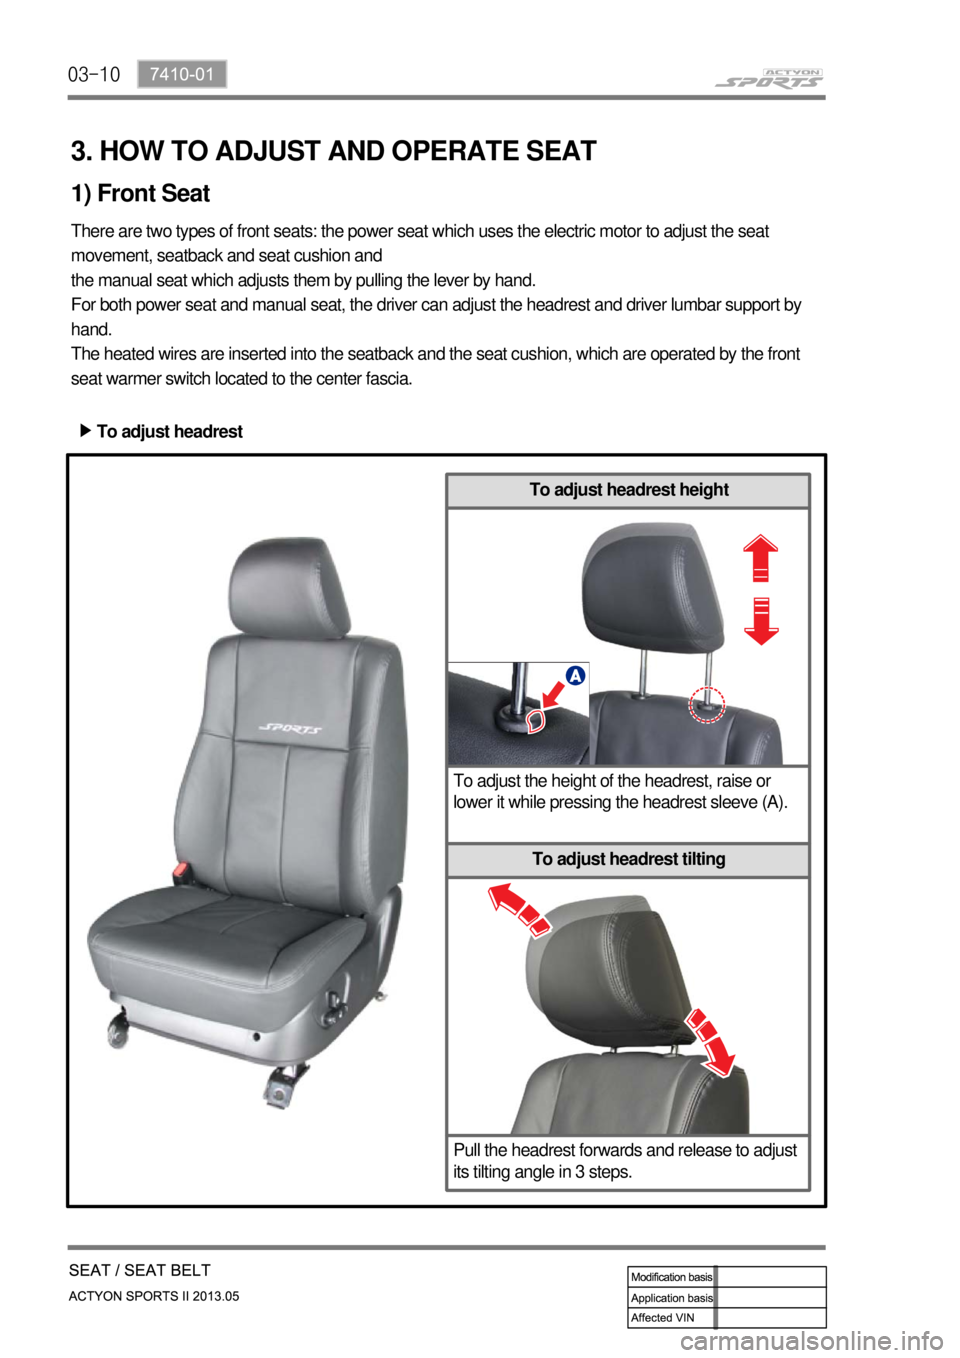 SSANGYONG NEW ACTYON SPORTS 2013  Service Manual 03-10
3. HOW TO ADJUST AND OPERATE SEAT 
1) Front Seat
There are two types of front seats: the power seat which uses the electric motor to adjust the seat 
movement, seatback and seat cushion and 
the